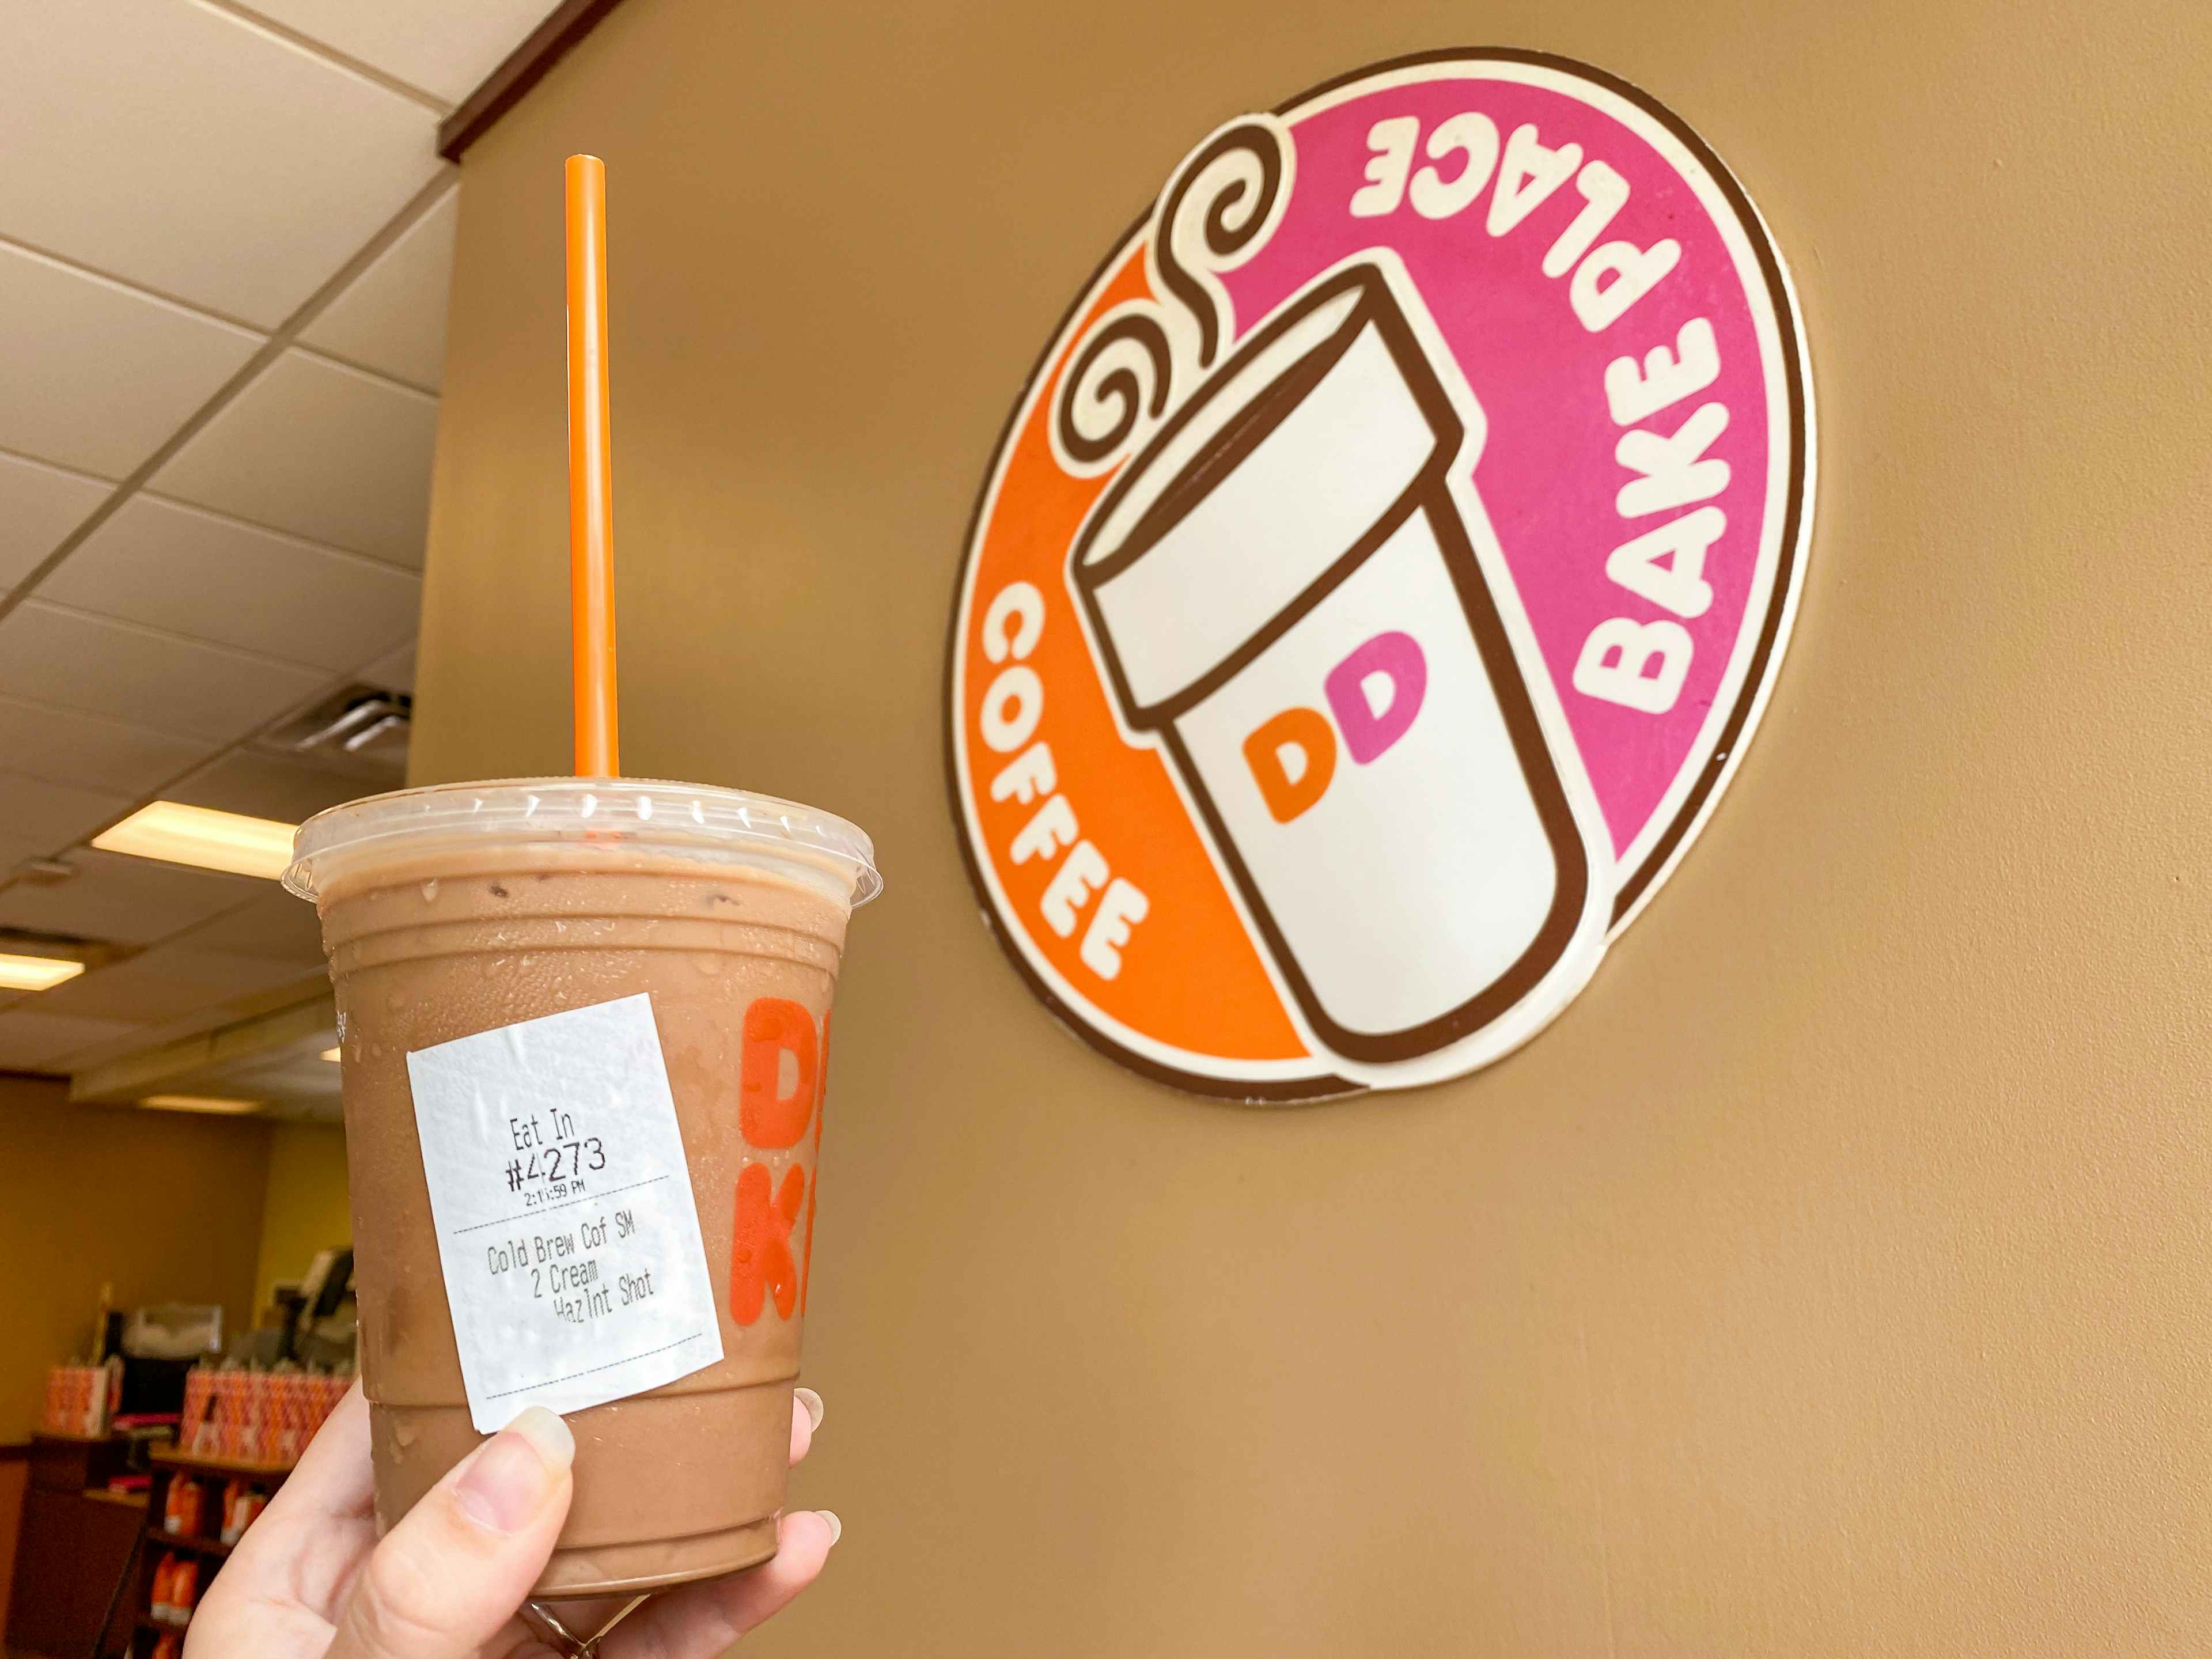 person's hand holding a dunkin' cold brew near store signage